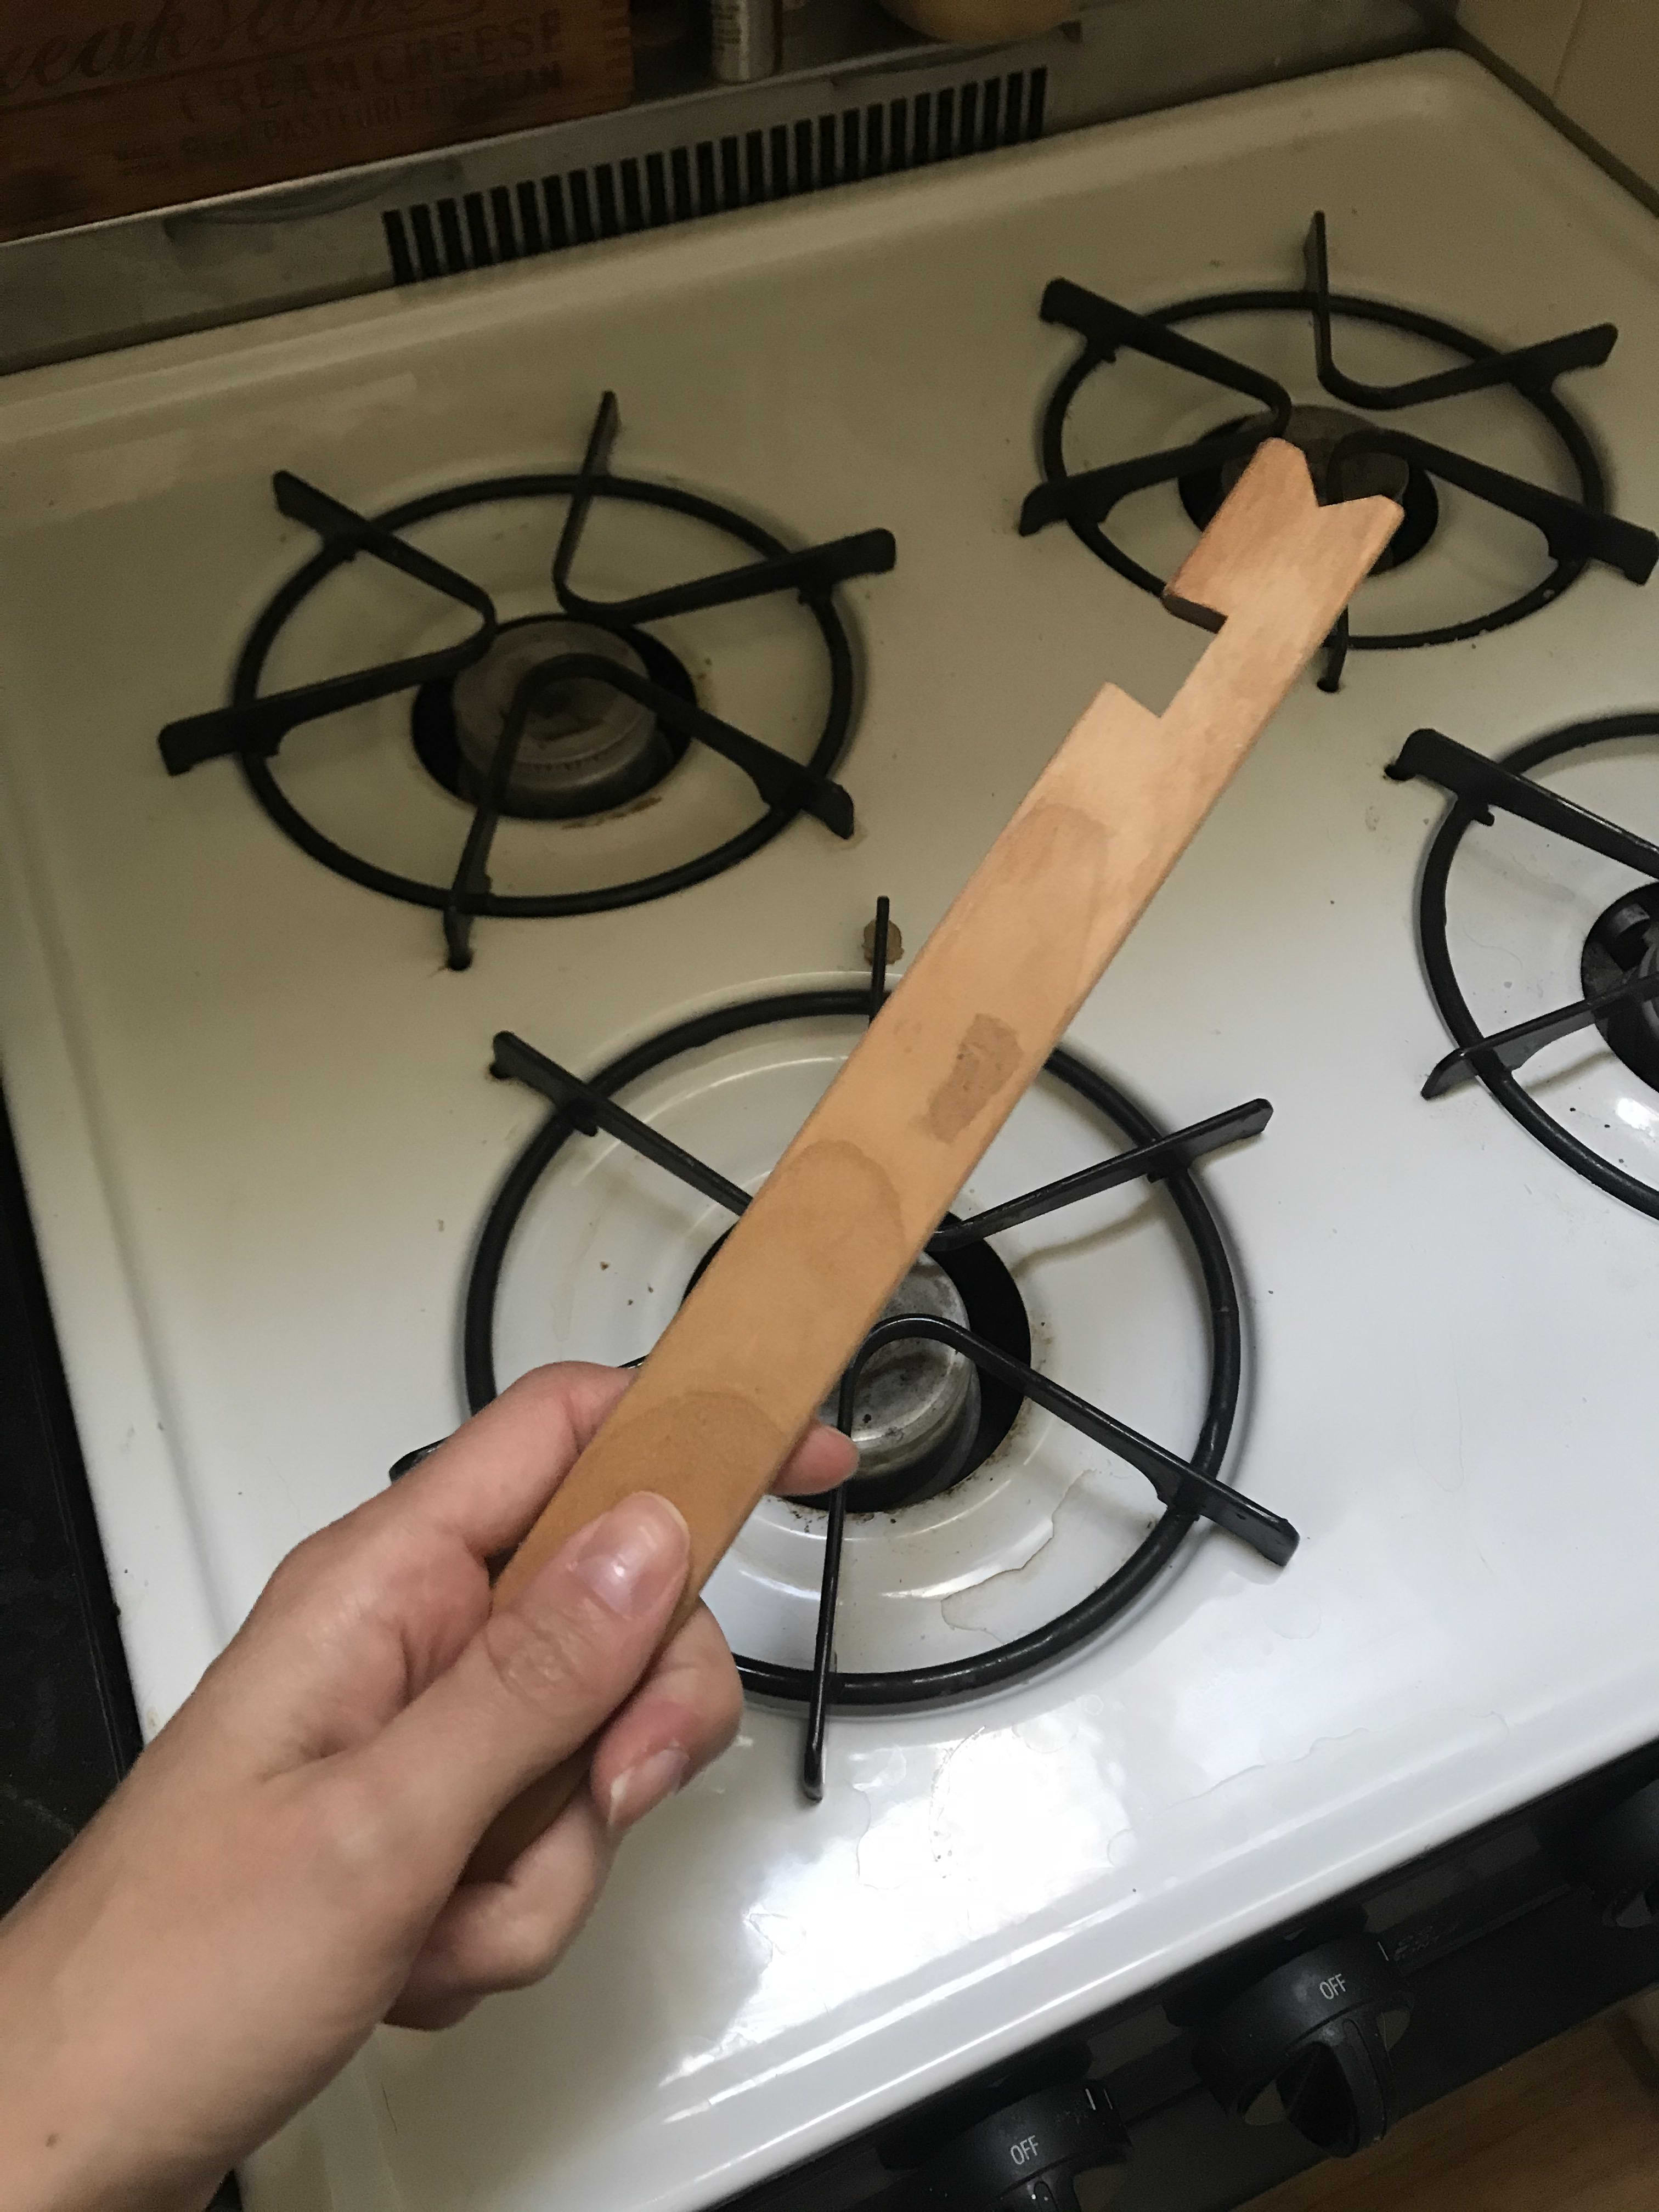 Oven Rack Push Pull Kitchen Ruler Wood Kitchen Gadget Tool Hang or Magnet